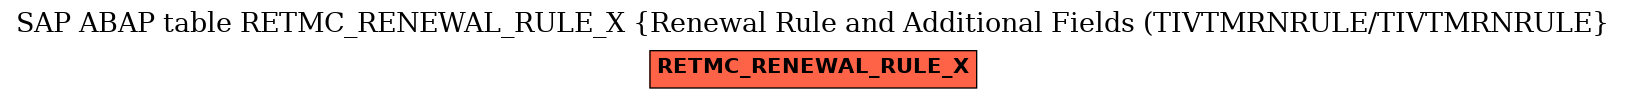 E-R Diagram for table RETMC_RENEWAL_RULE_X (Renewal Rule and Additional Fields (TIVTMRNRULE/TIVTMRNRULE)